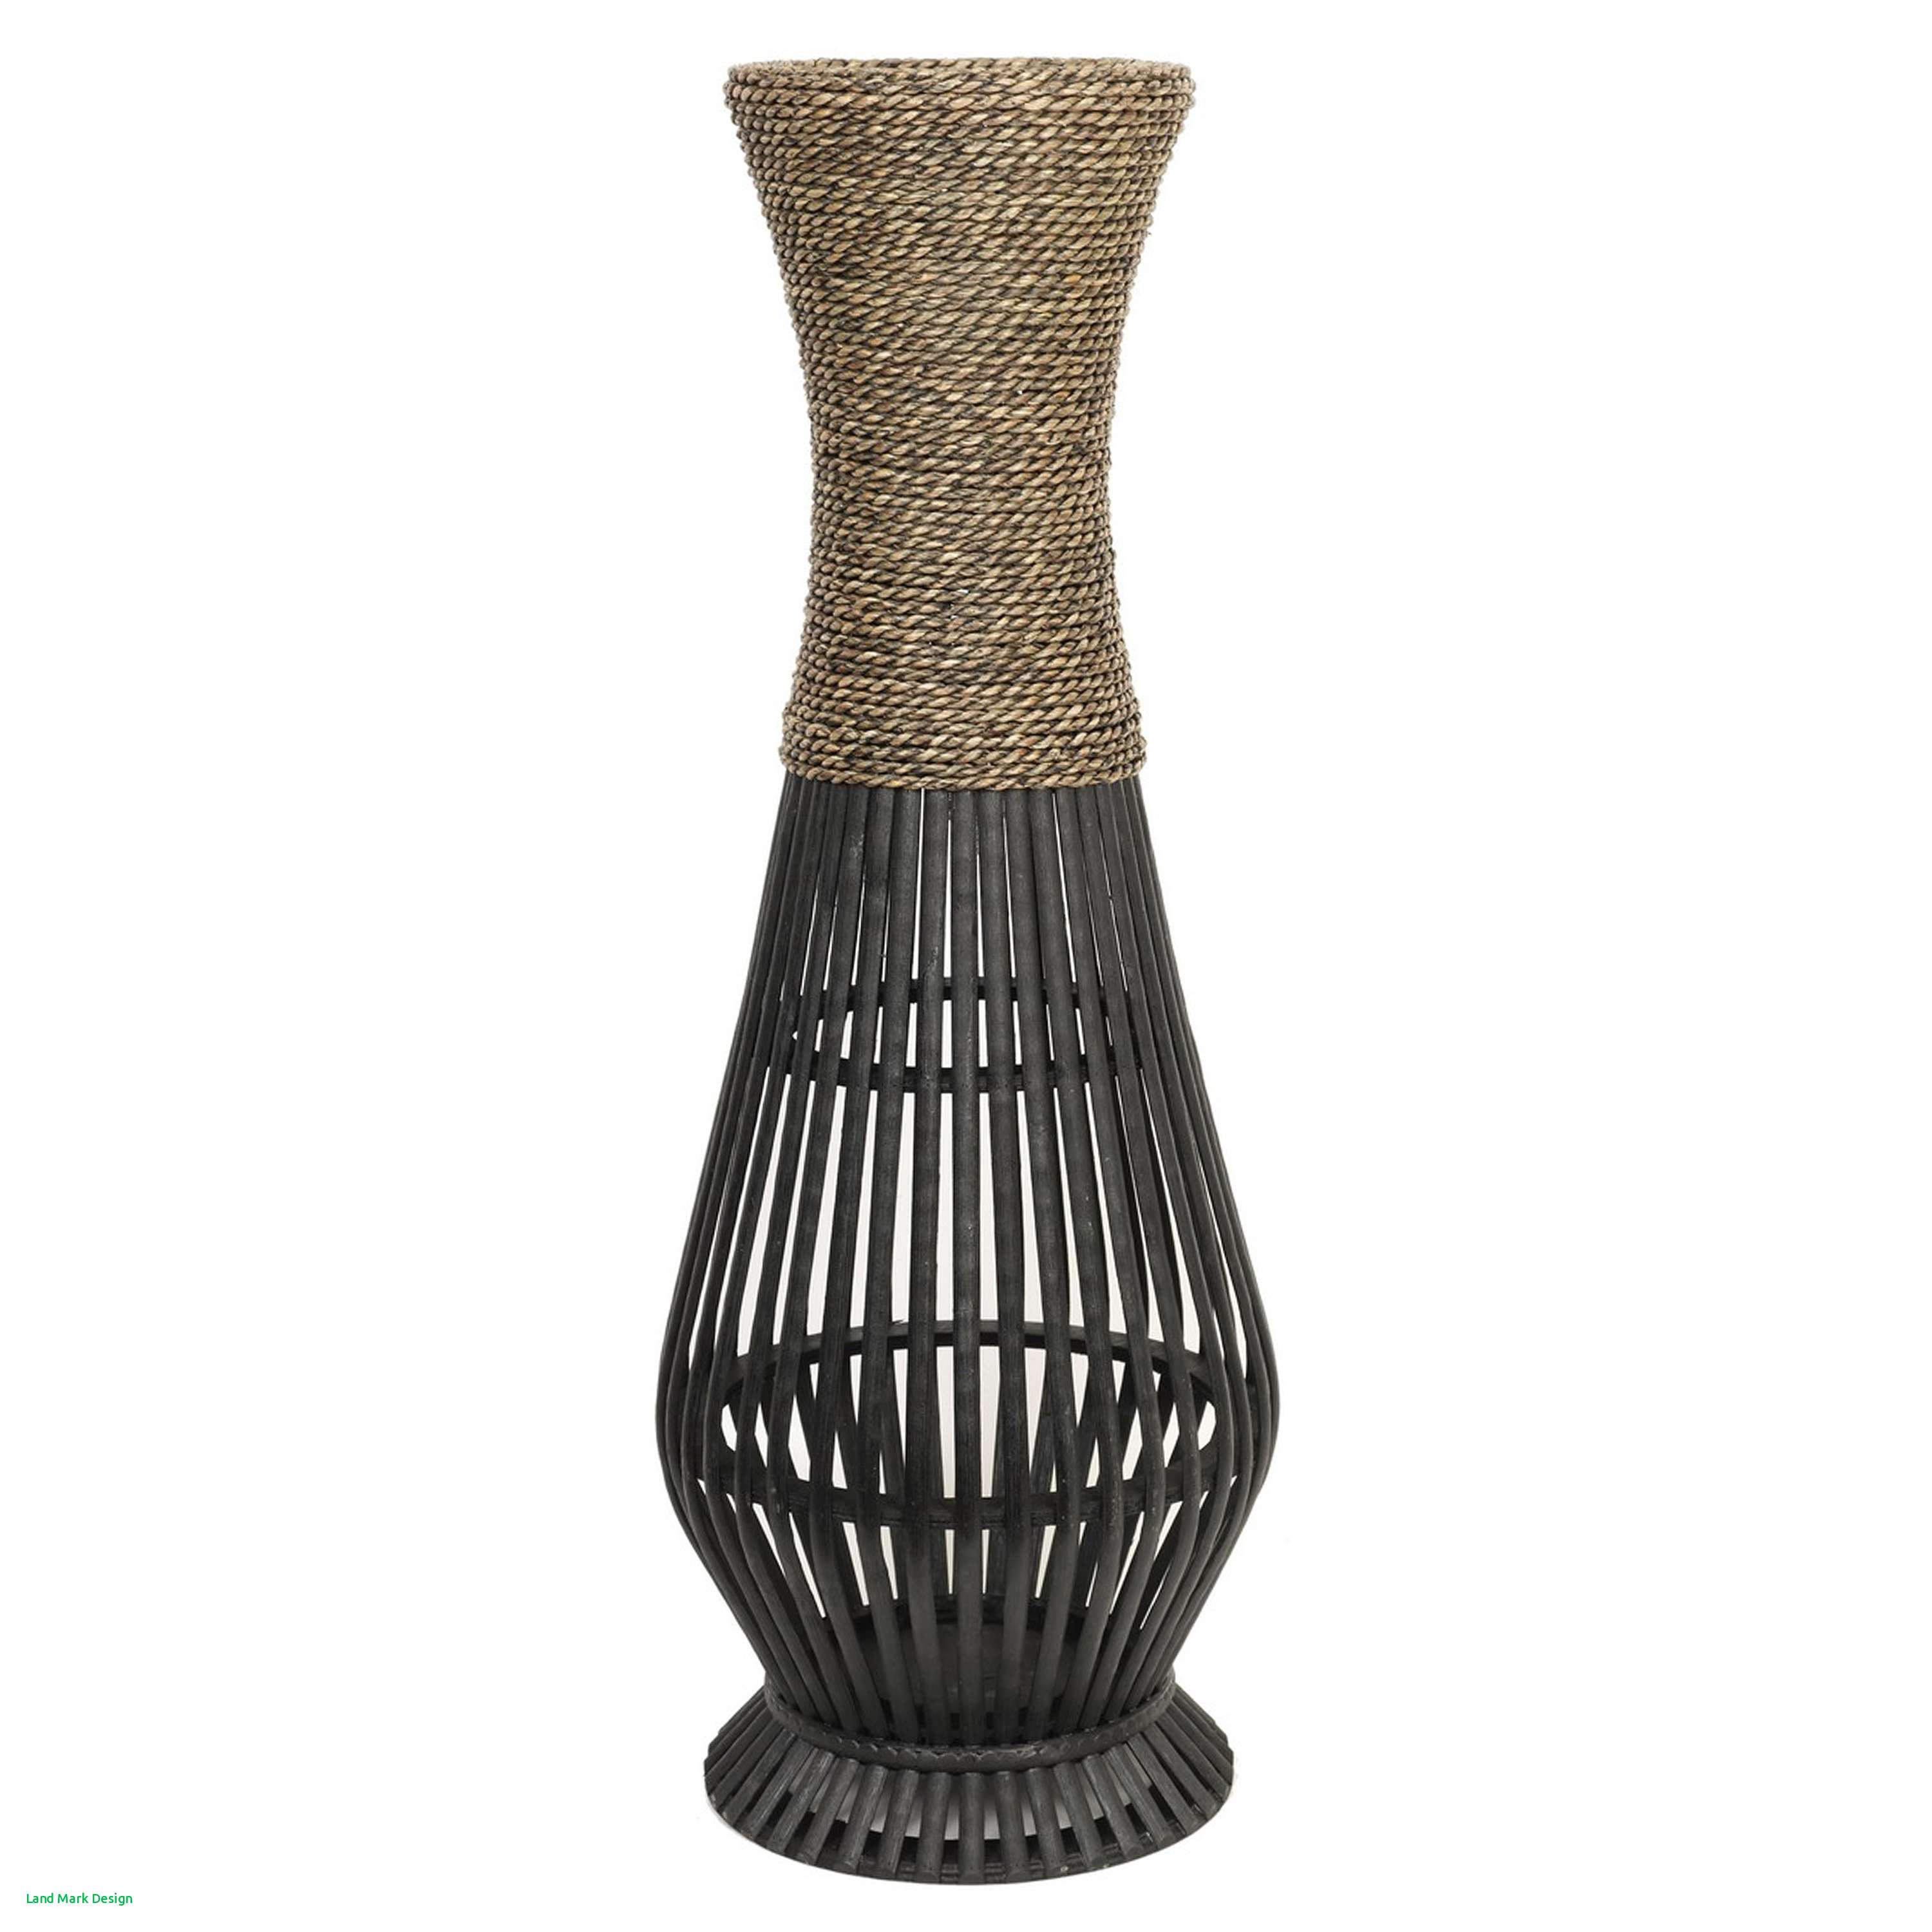 36 Glass Cylinder Vases Of Tall Wicker Vase Design Home Design with 0bcc0b57 C2d1 4c6d Ae1c 6534a6faae99 1 Vases Wicker Tall I 3d